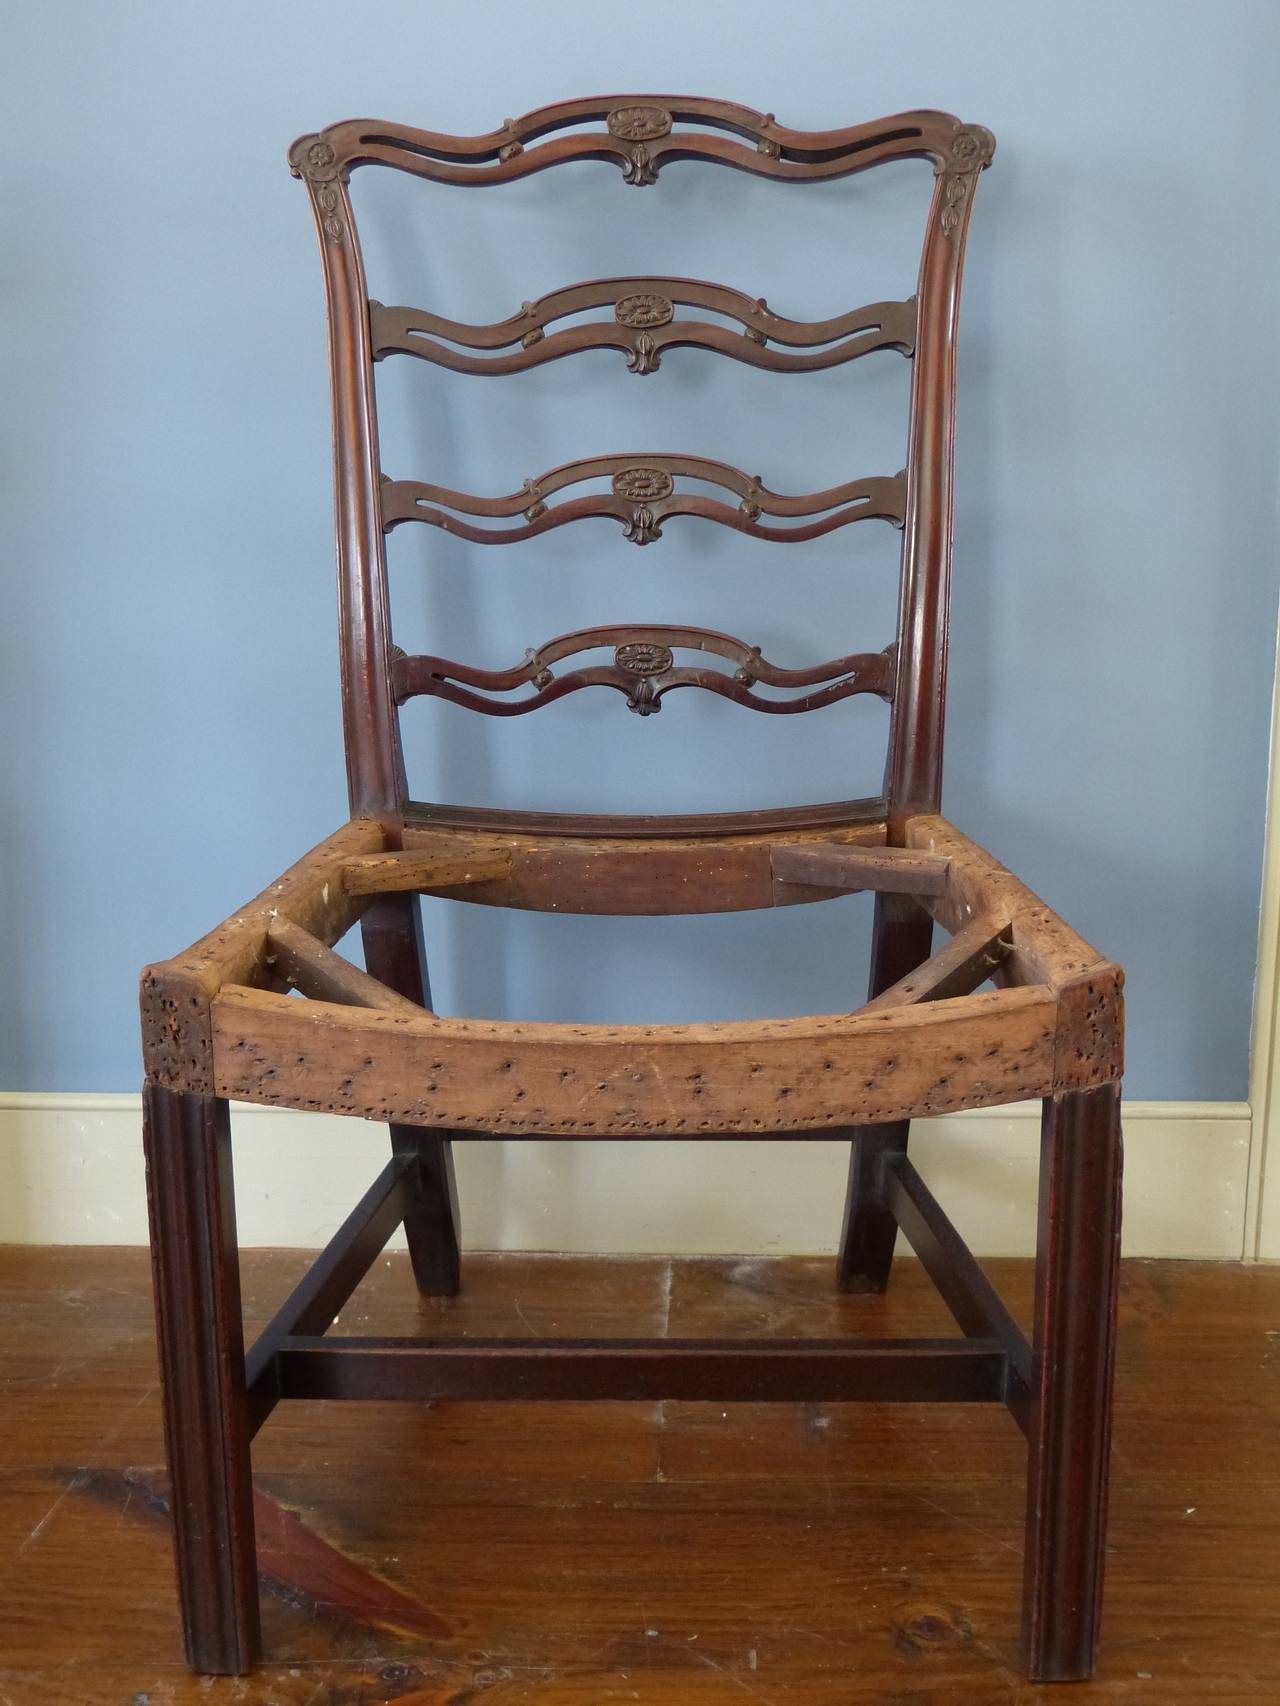 A very fine quality pair of 18th century Georgian mahogany ladder backside chairs with saddle seats and square fluted tapering legs. The shaped ladder backs with carved central rosettes and inverted bellflower carvings to top rail, English, circa